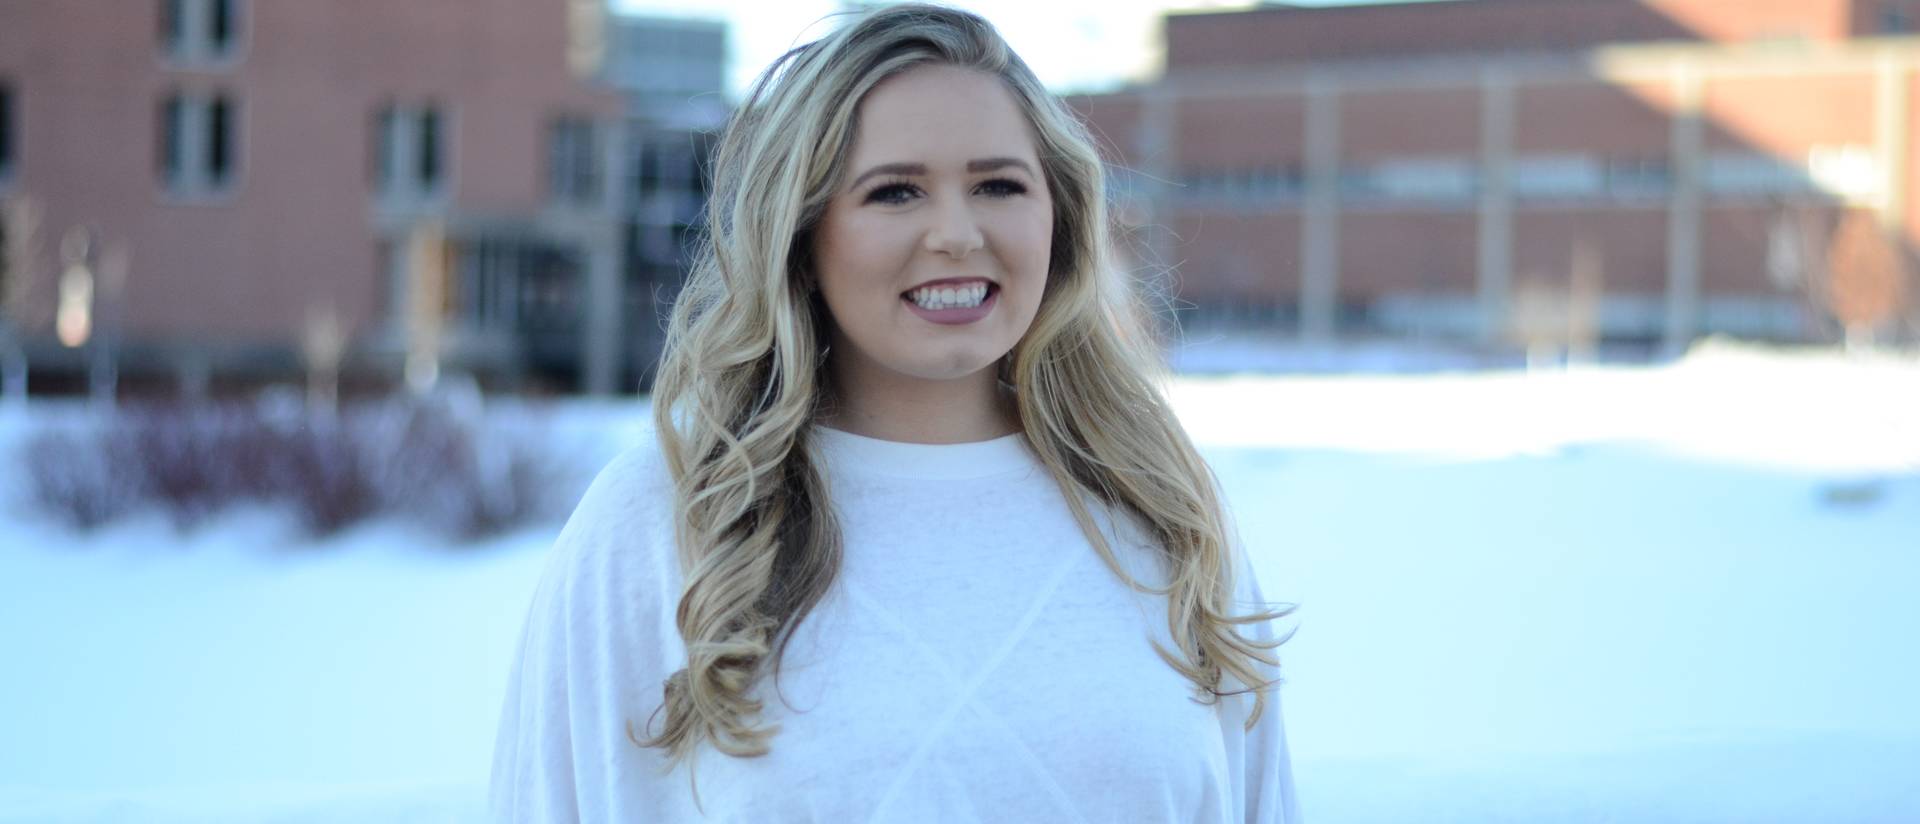 Senior Taylor Schneider's internship moved from in-person to virtual because of the pandemic.